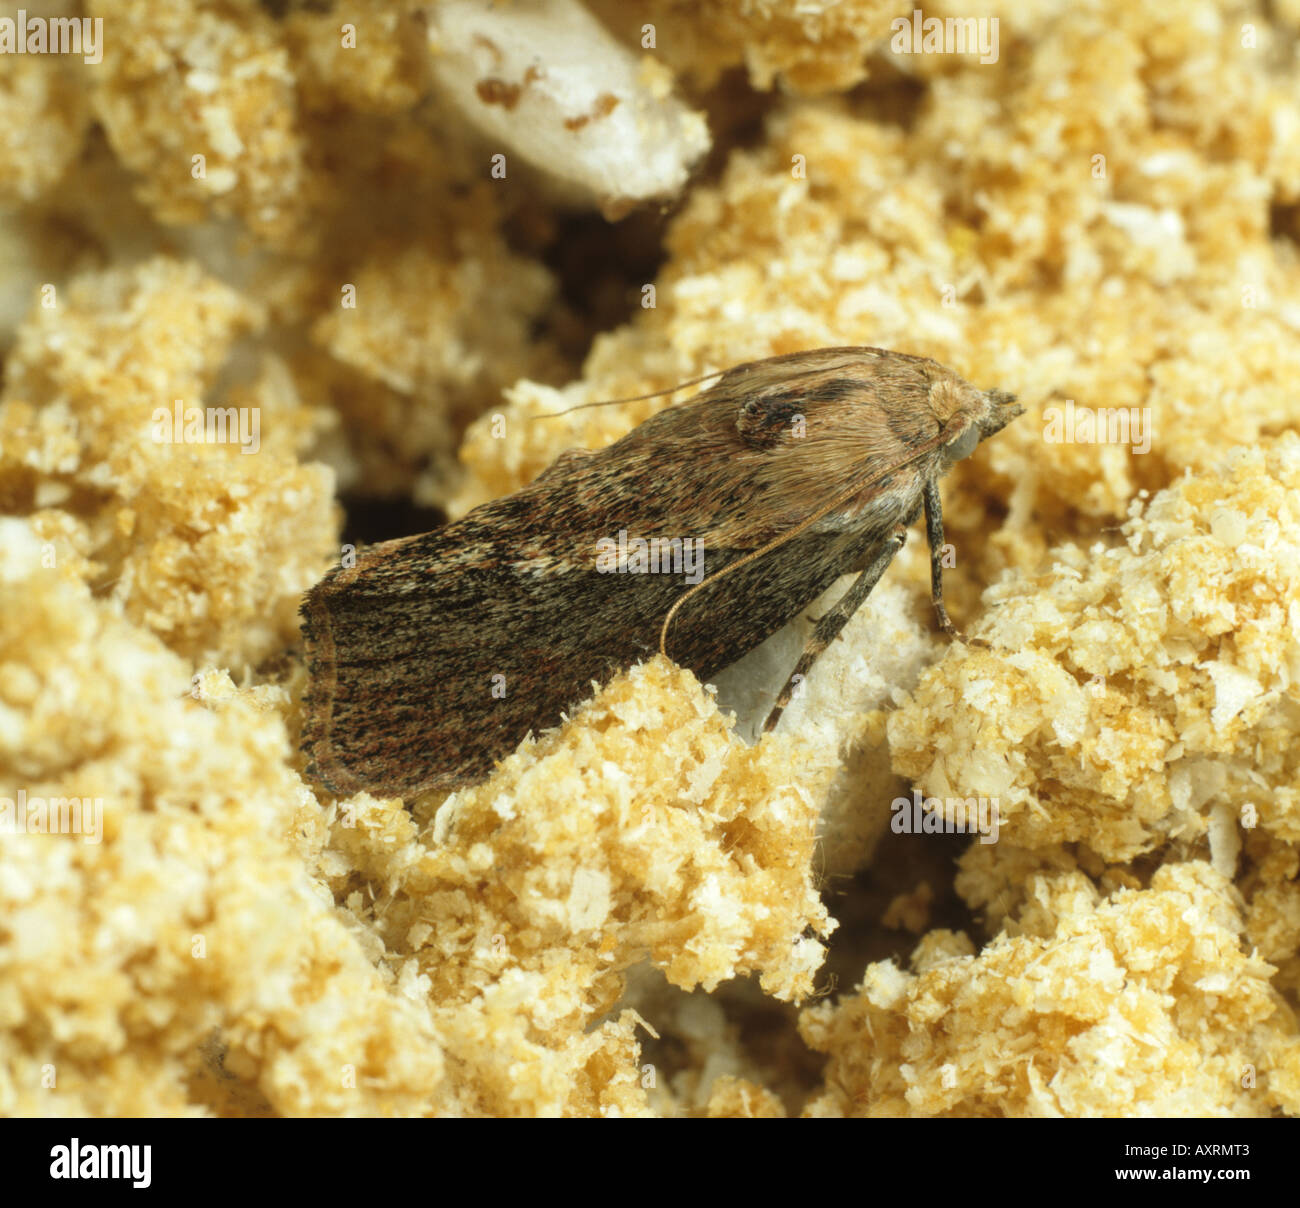 Wax moth Galleria mellonella adult on wax debris, pest of beehives Stock Photo